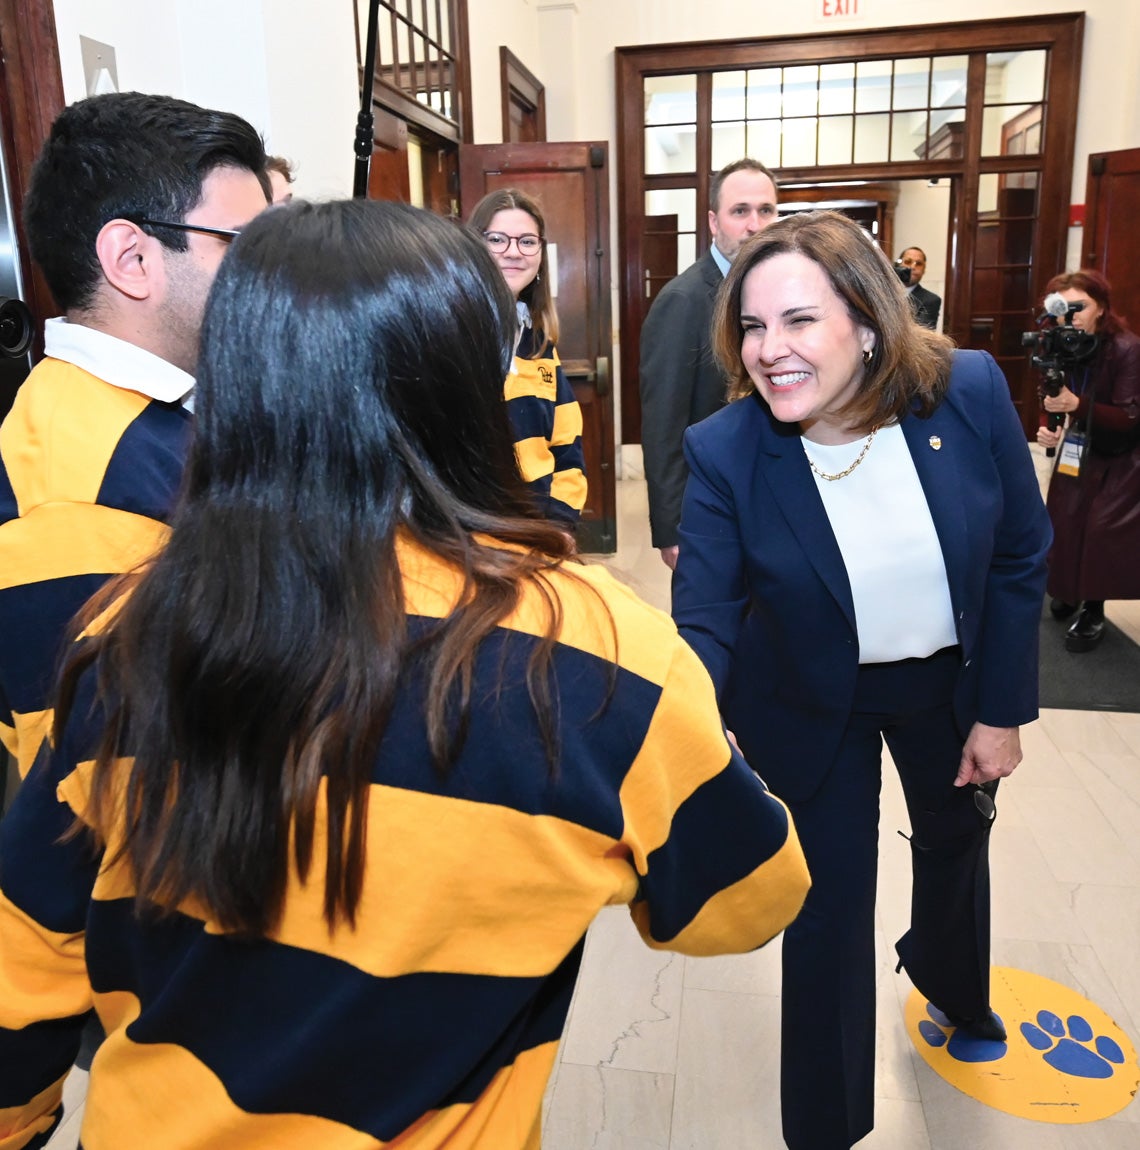 Gabel shakes hands with students in blue and yellow striped polo shirts